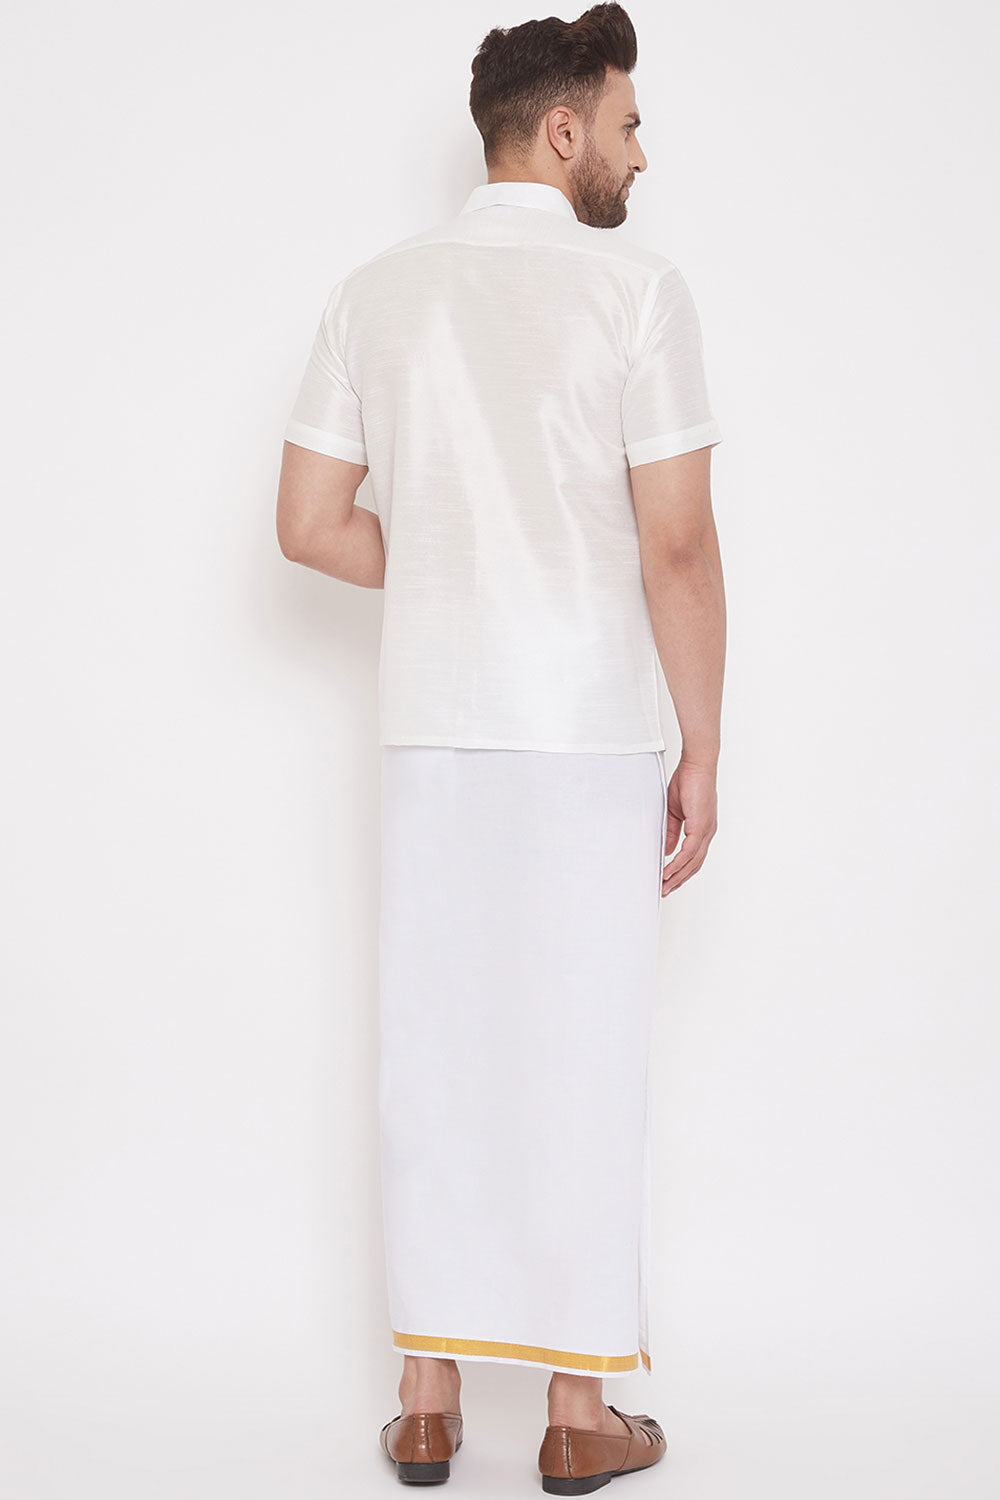 Solid White Shirt and Mundu for Casual Wear